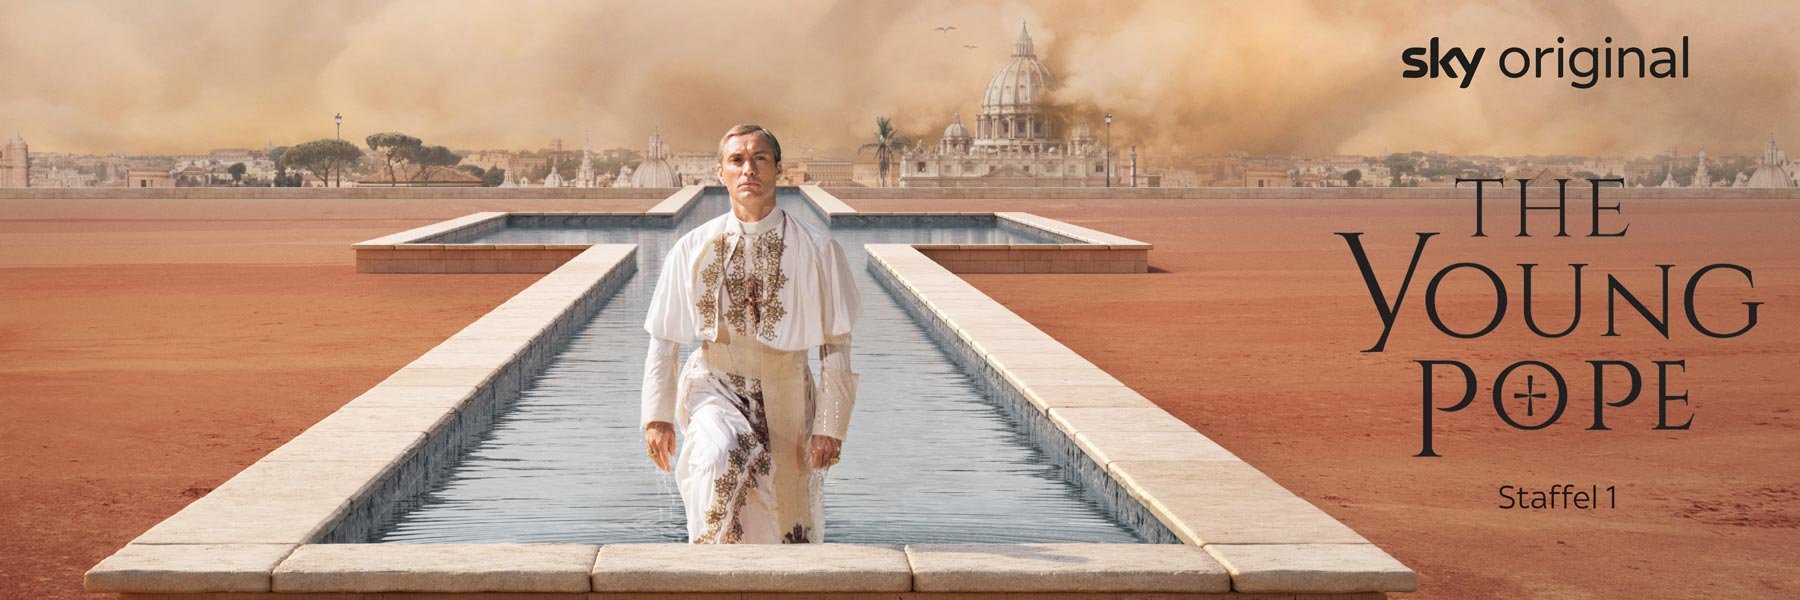 The Young Pope mit Sky X streamen